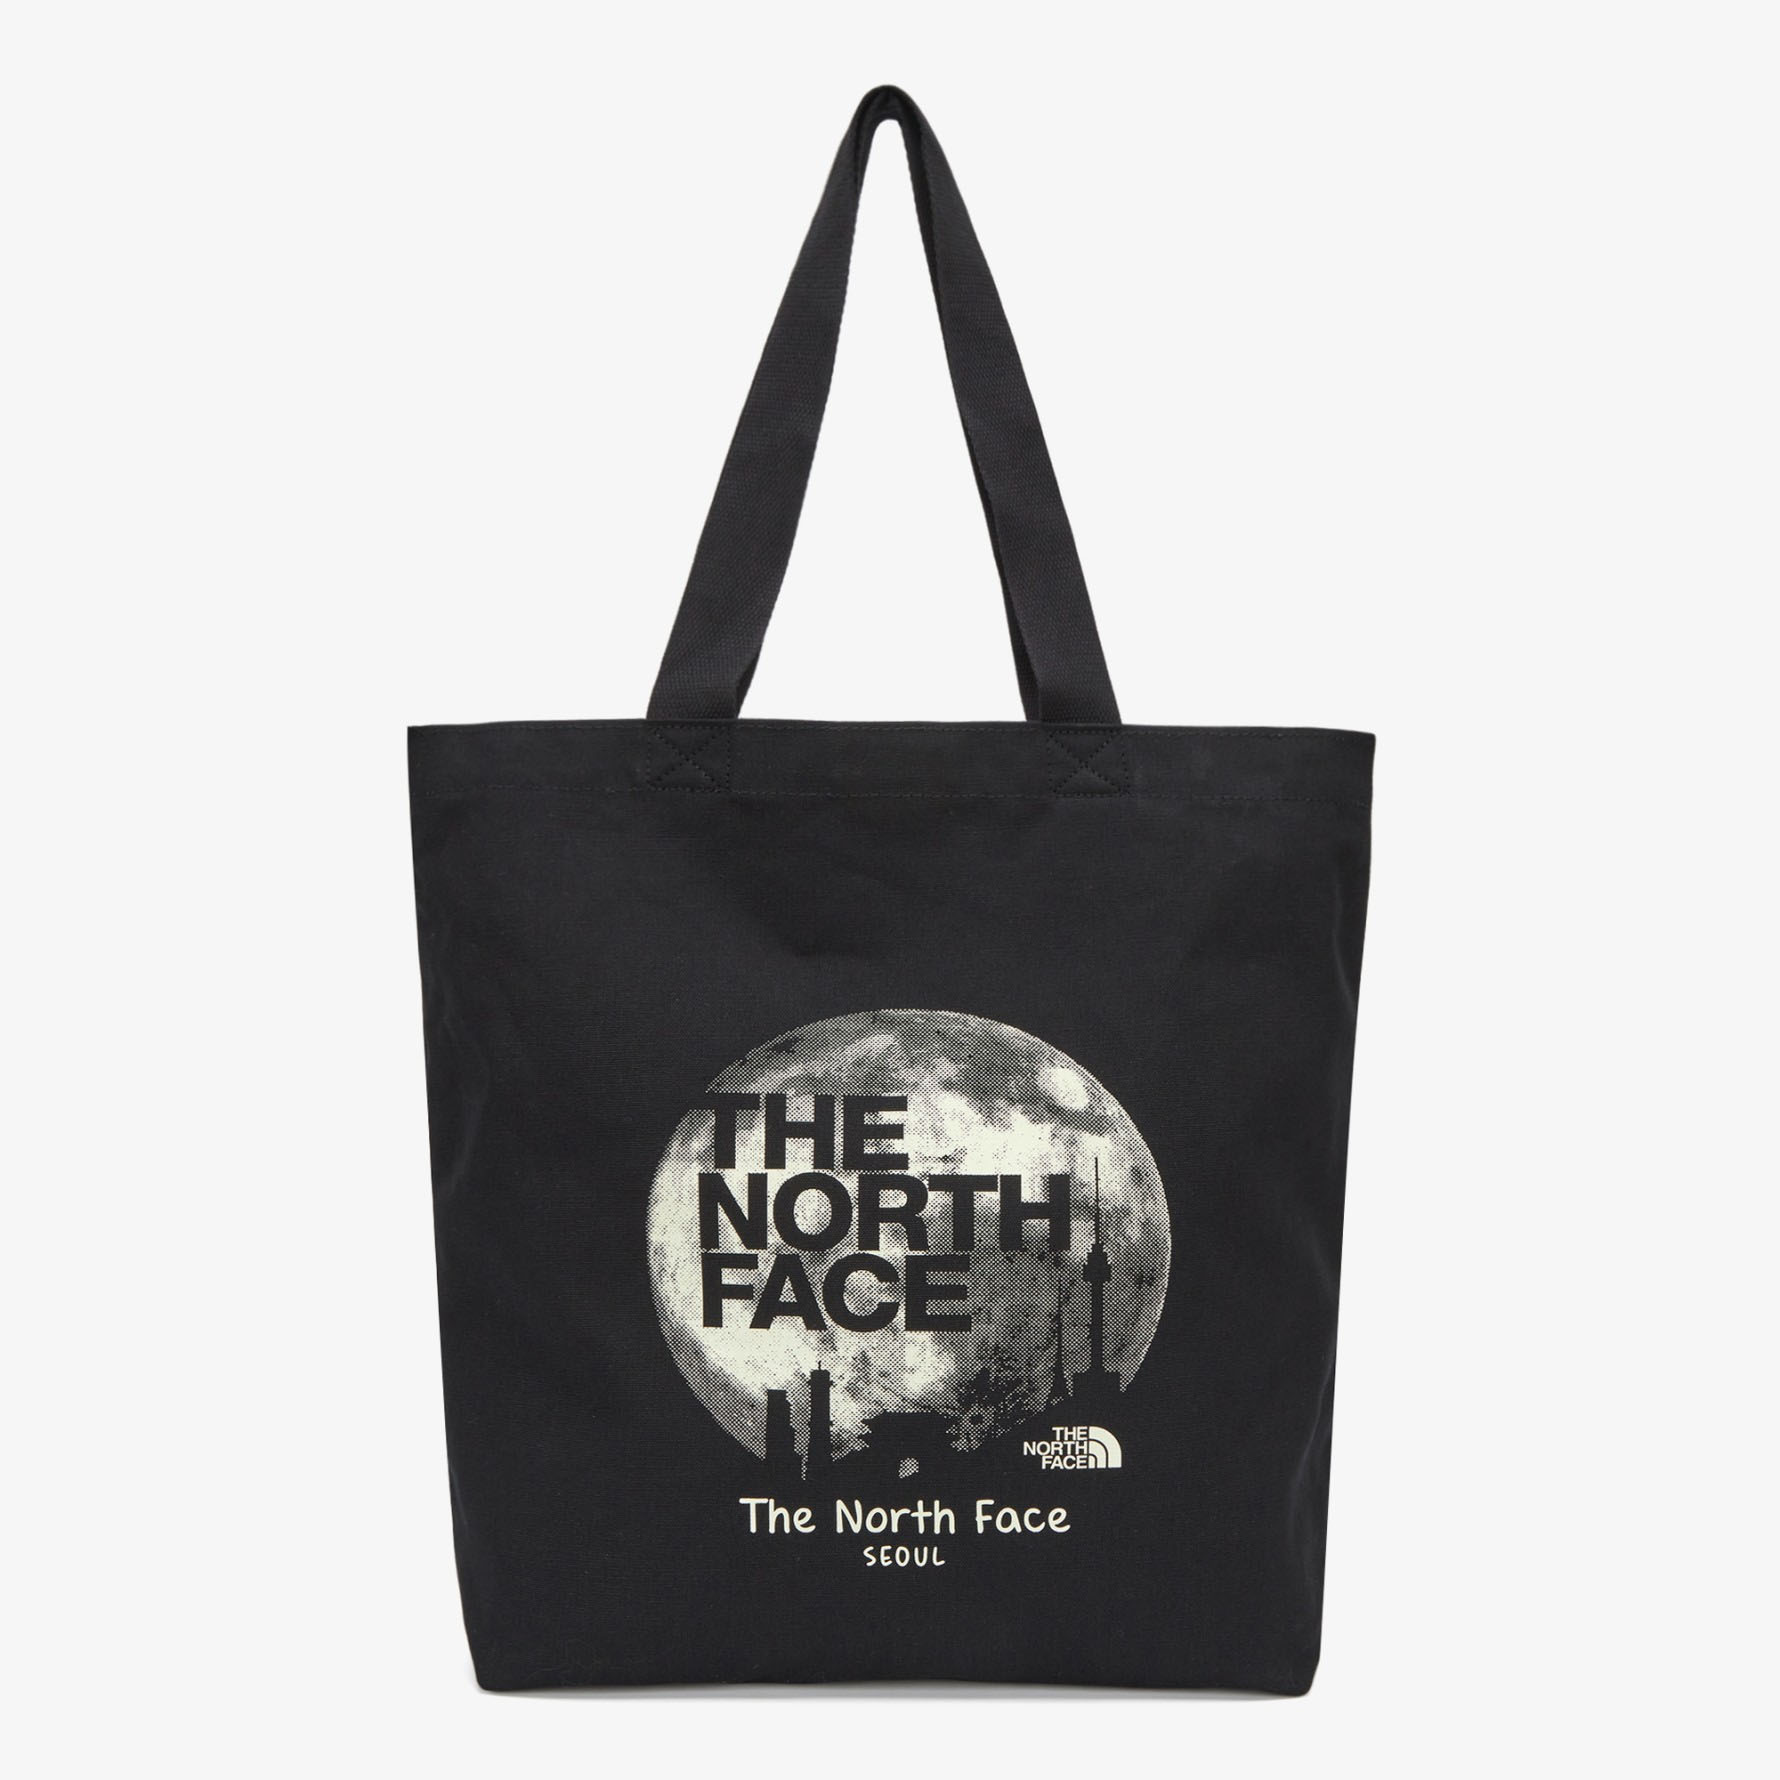 THE NORTH FACE トートバッグ キャンバストート TNF COTTON TOTE SEO...